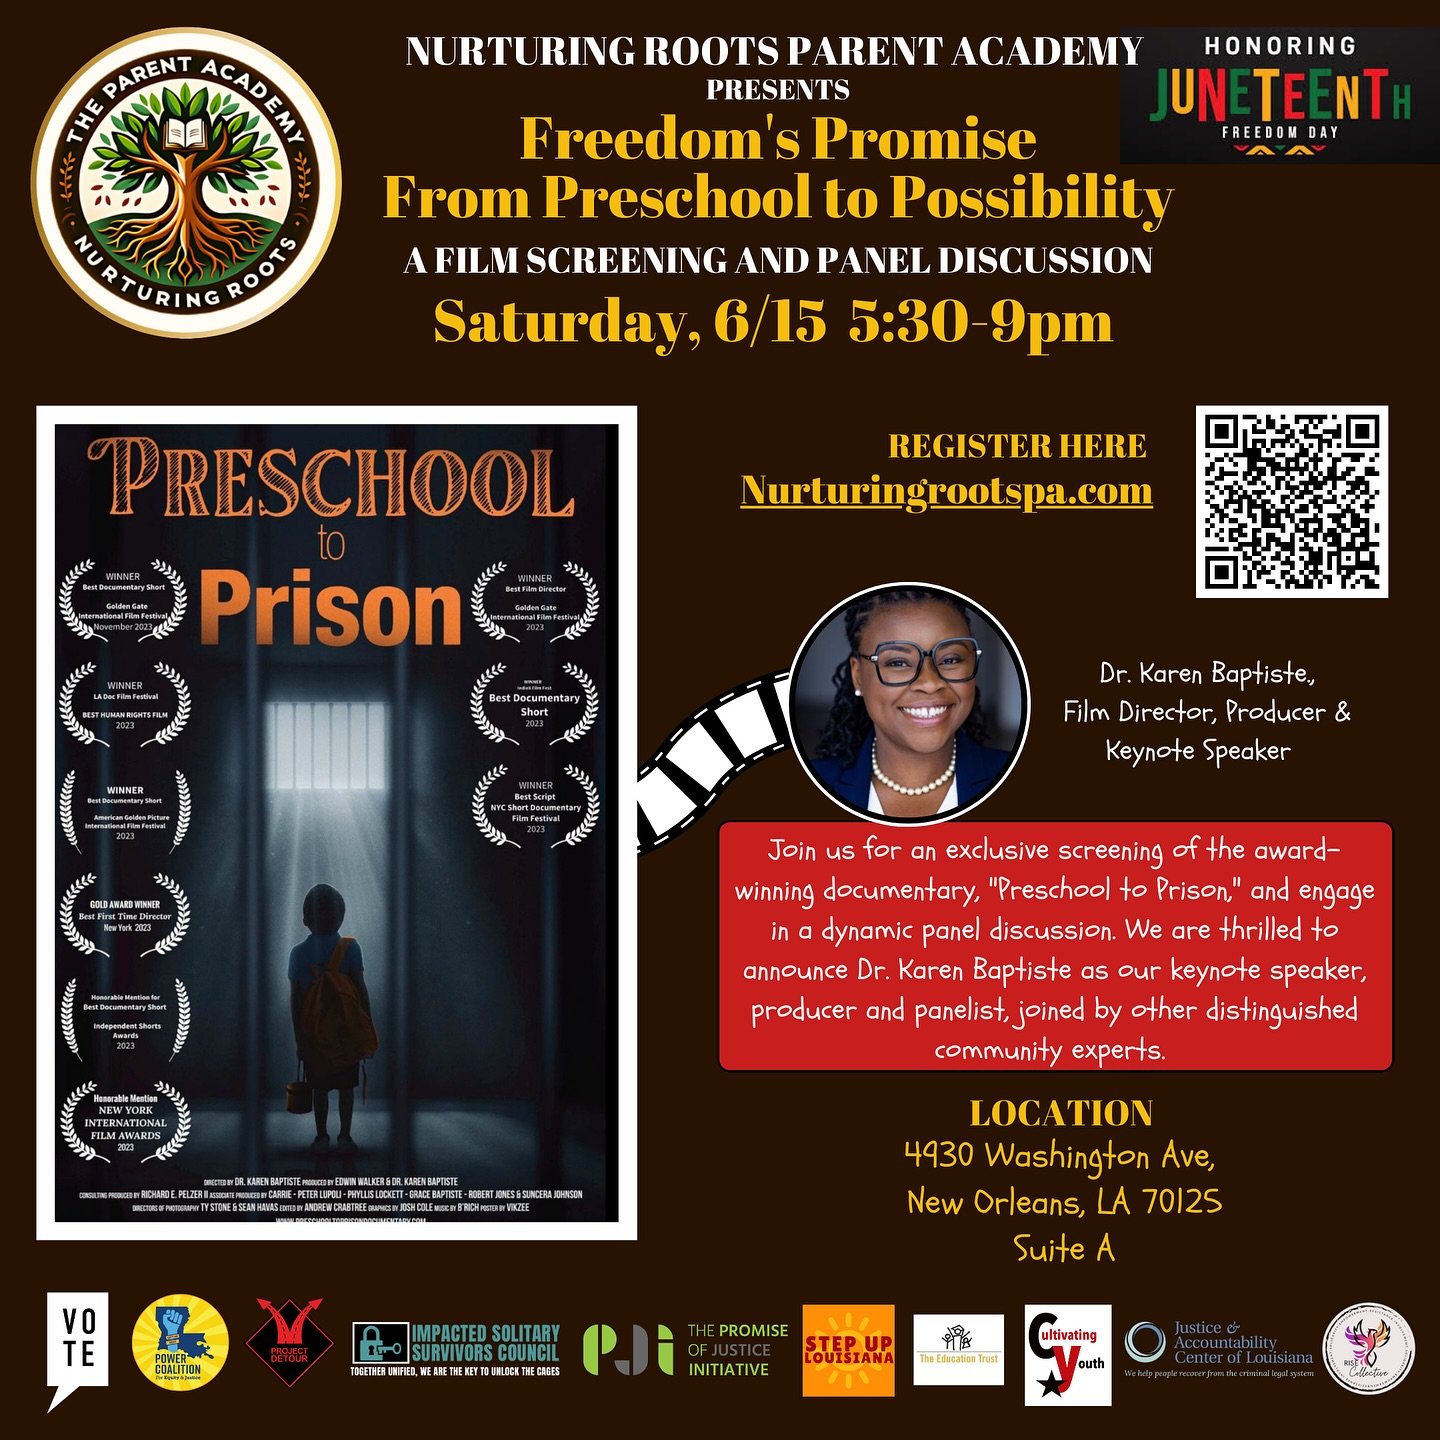 Join Nurturing Roots Parent Academy at VOTE HQ on Saturday, June 15th for a fundraiser screening of the award-winning &ldquo;Preschool to Prison&rdquo; documentary. 
&nbsp;
The screening will be followed by a panel discussion with Director &amp; Prod